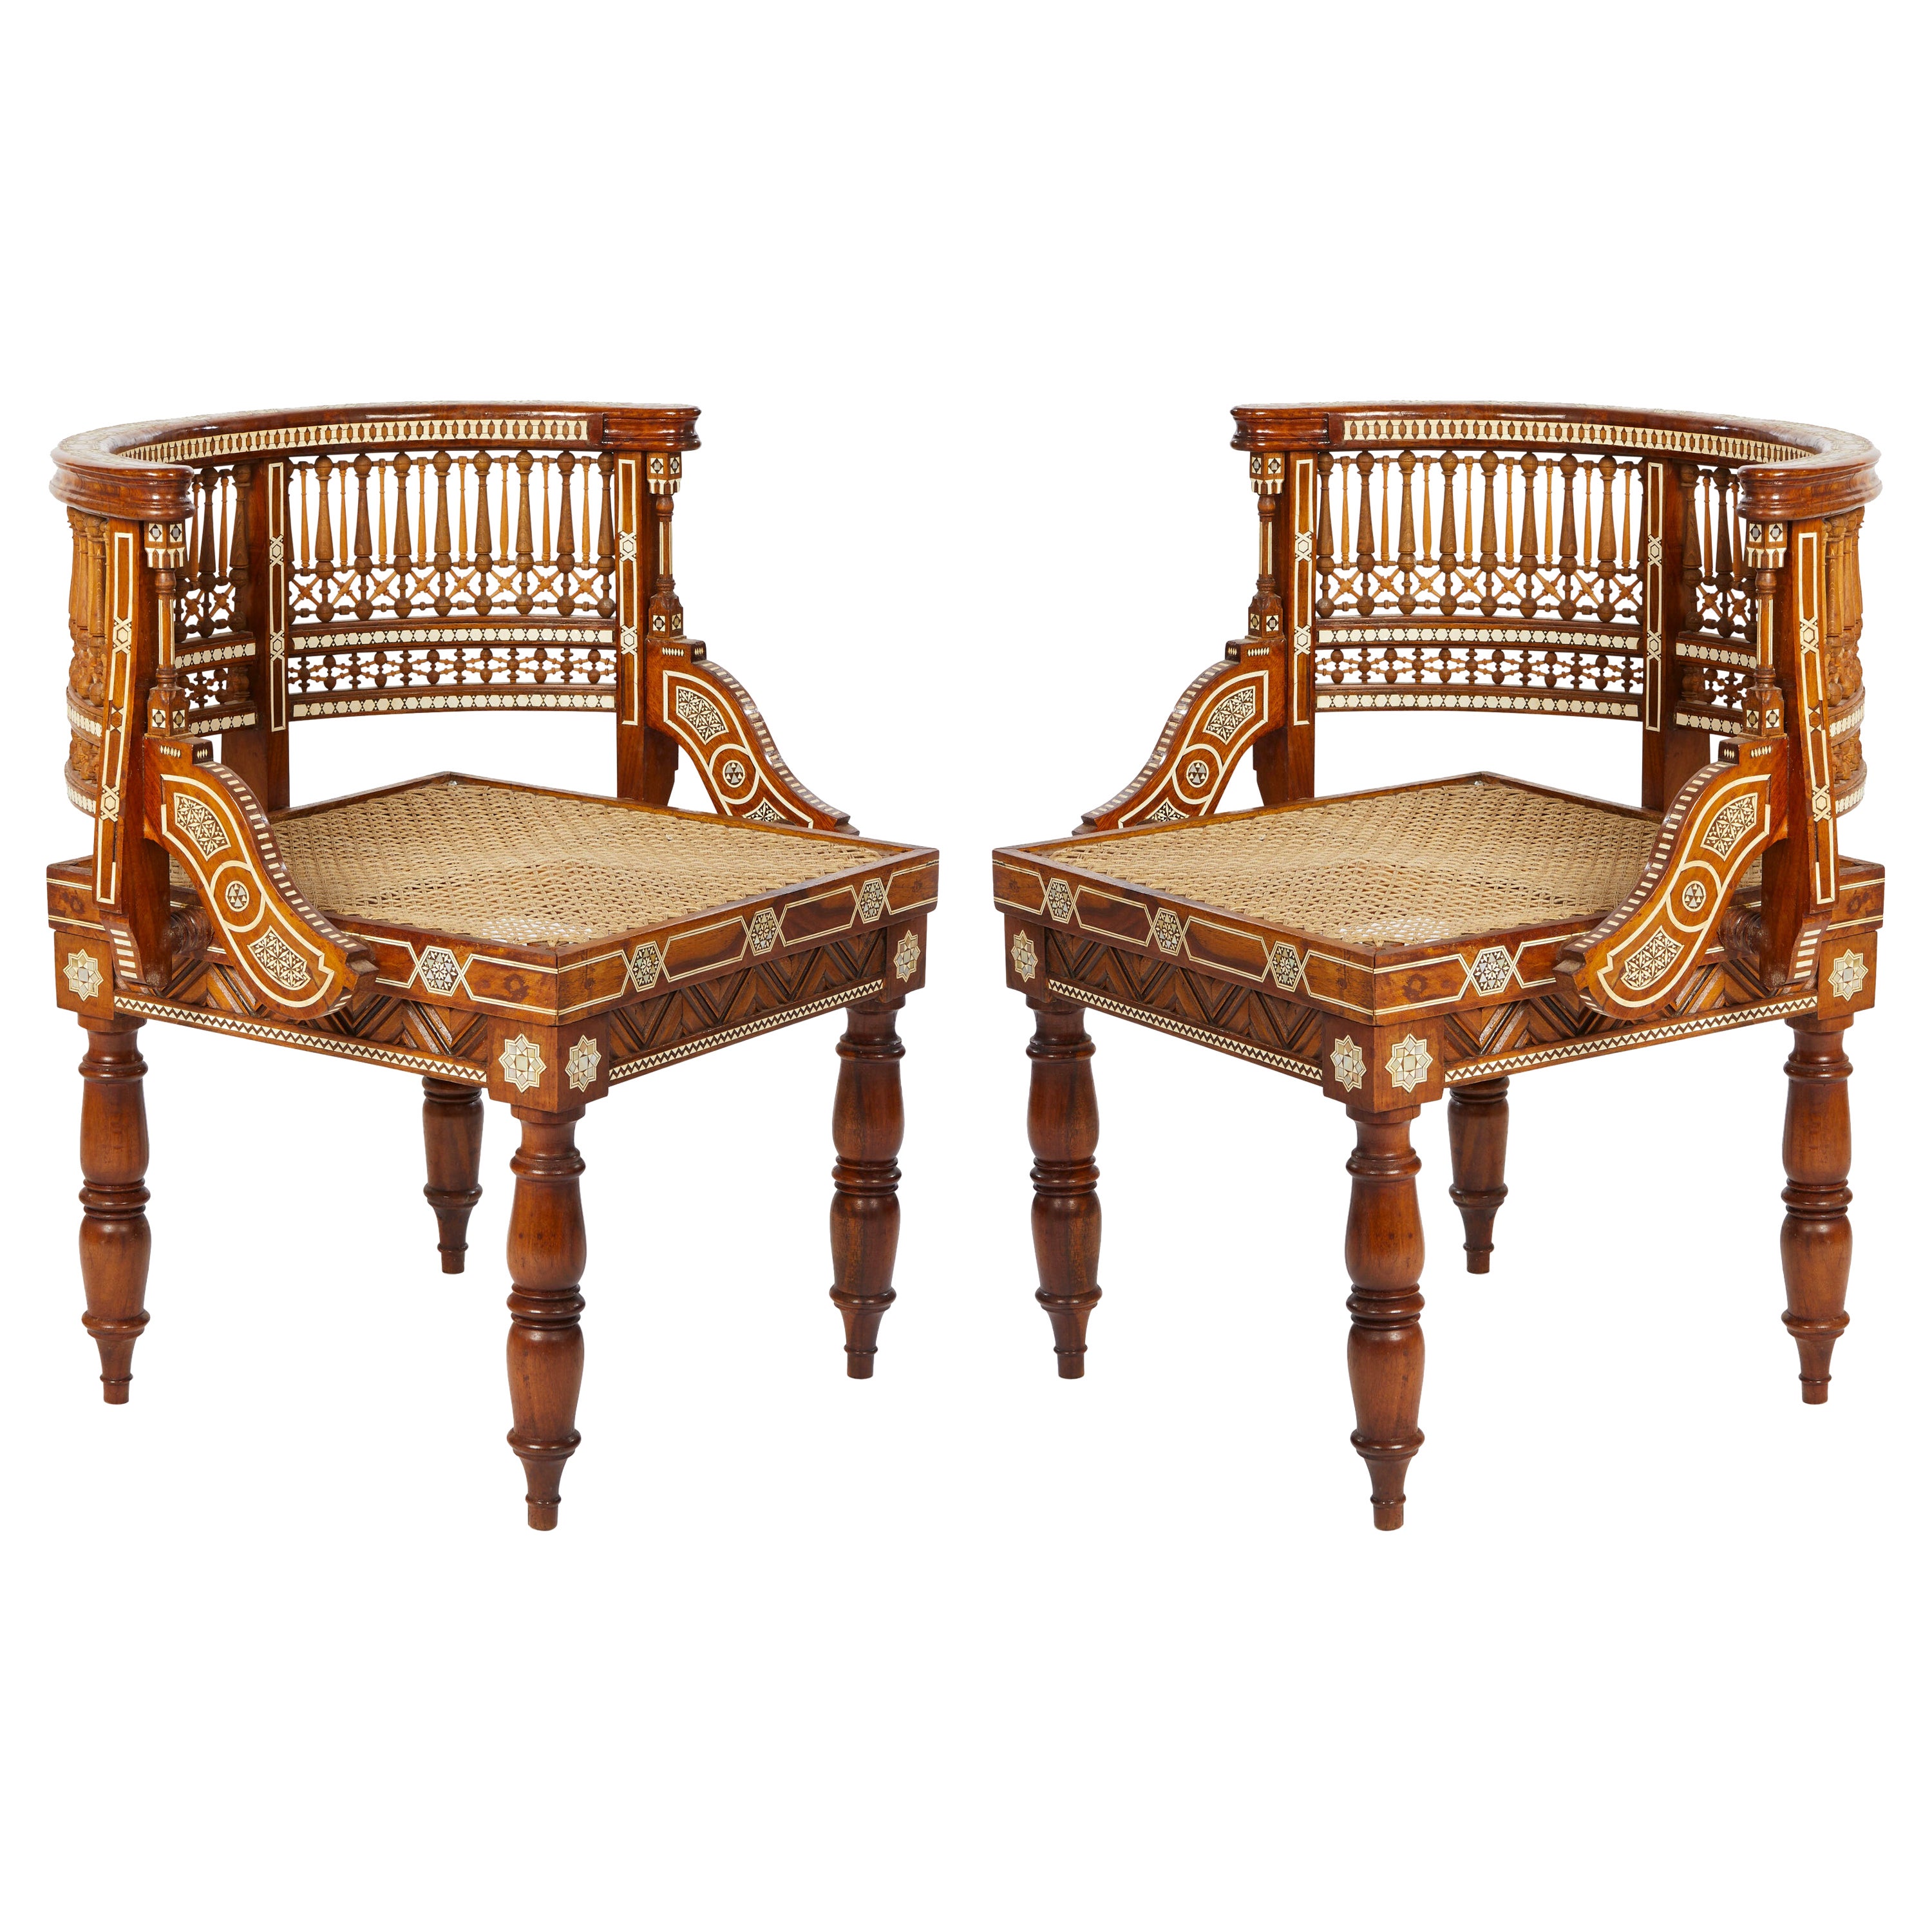 Pair of Moroccan Inlaid Rosewood Chairs